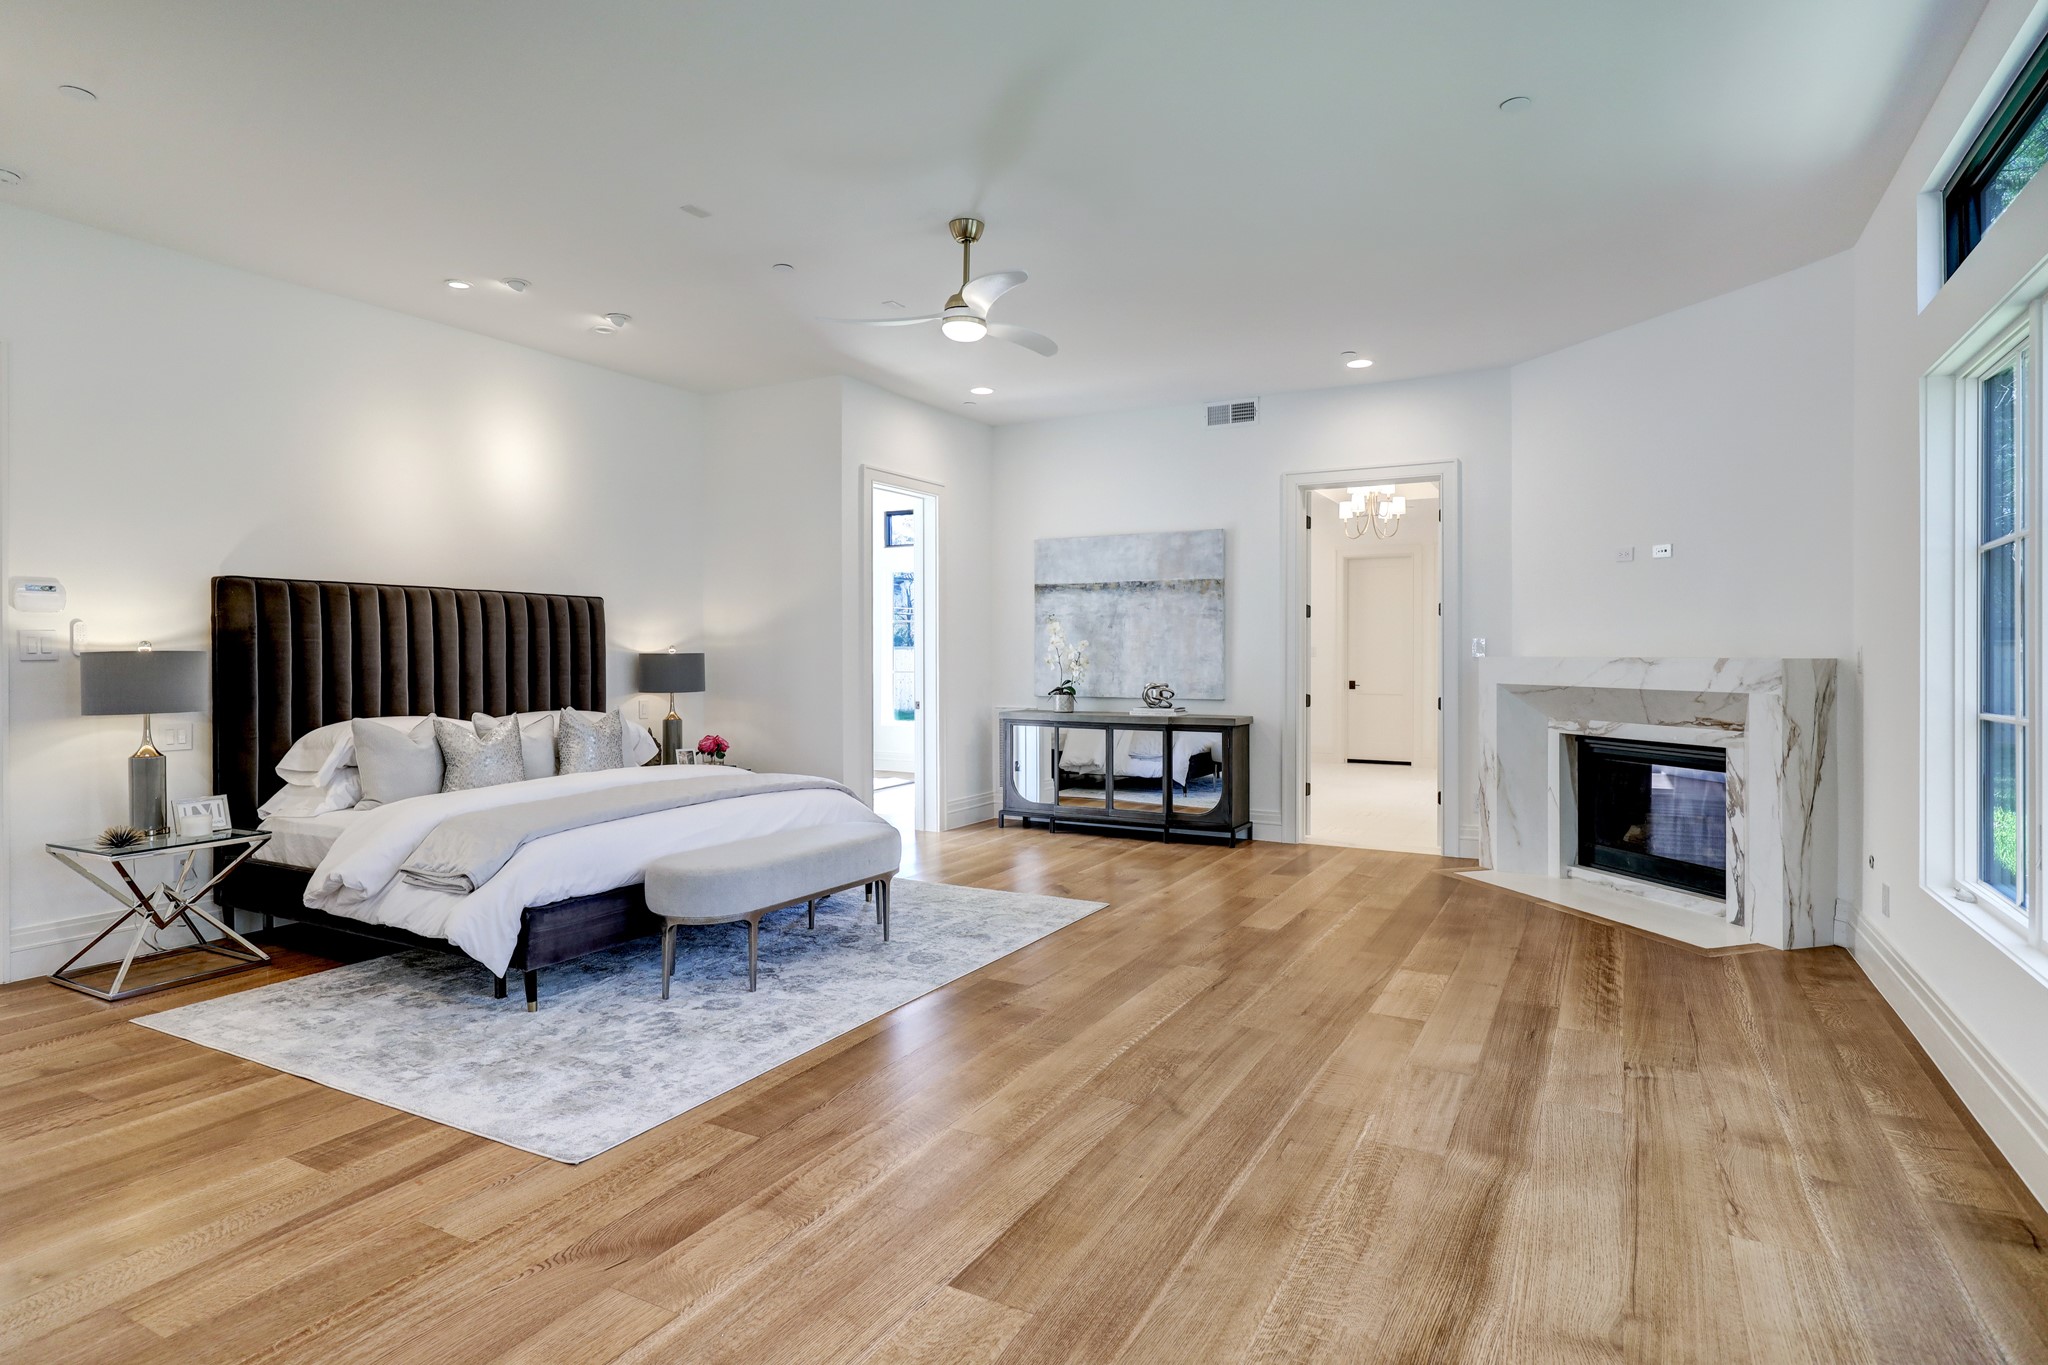 Primary bedroom suite is spacious and cozy with a stunning corner fireplace, lovely windows and an attached sitting area and separate home office/study. The honeyed French Oak floors shine.